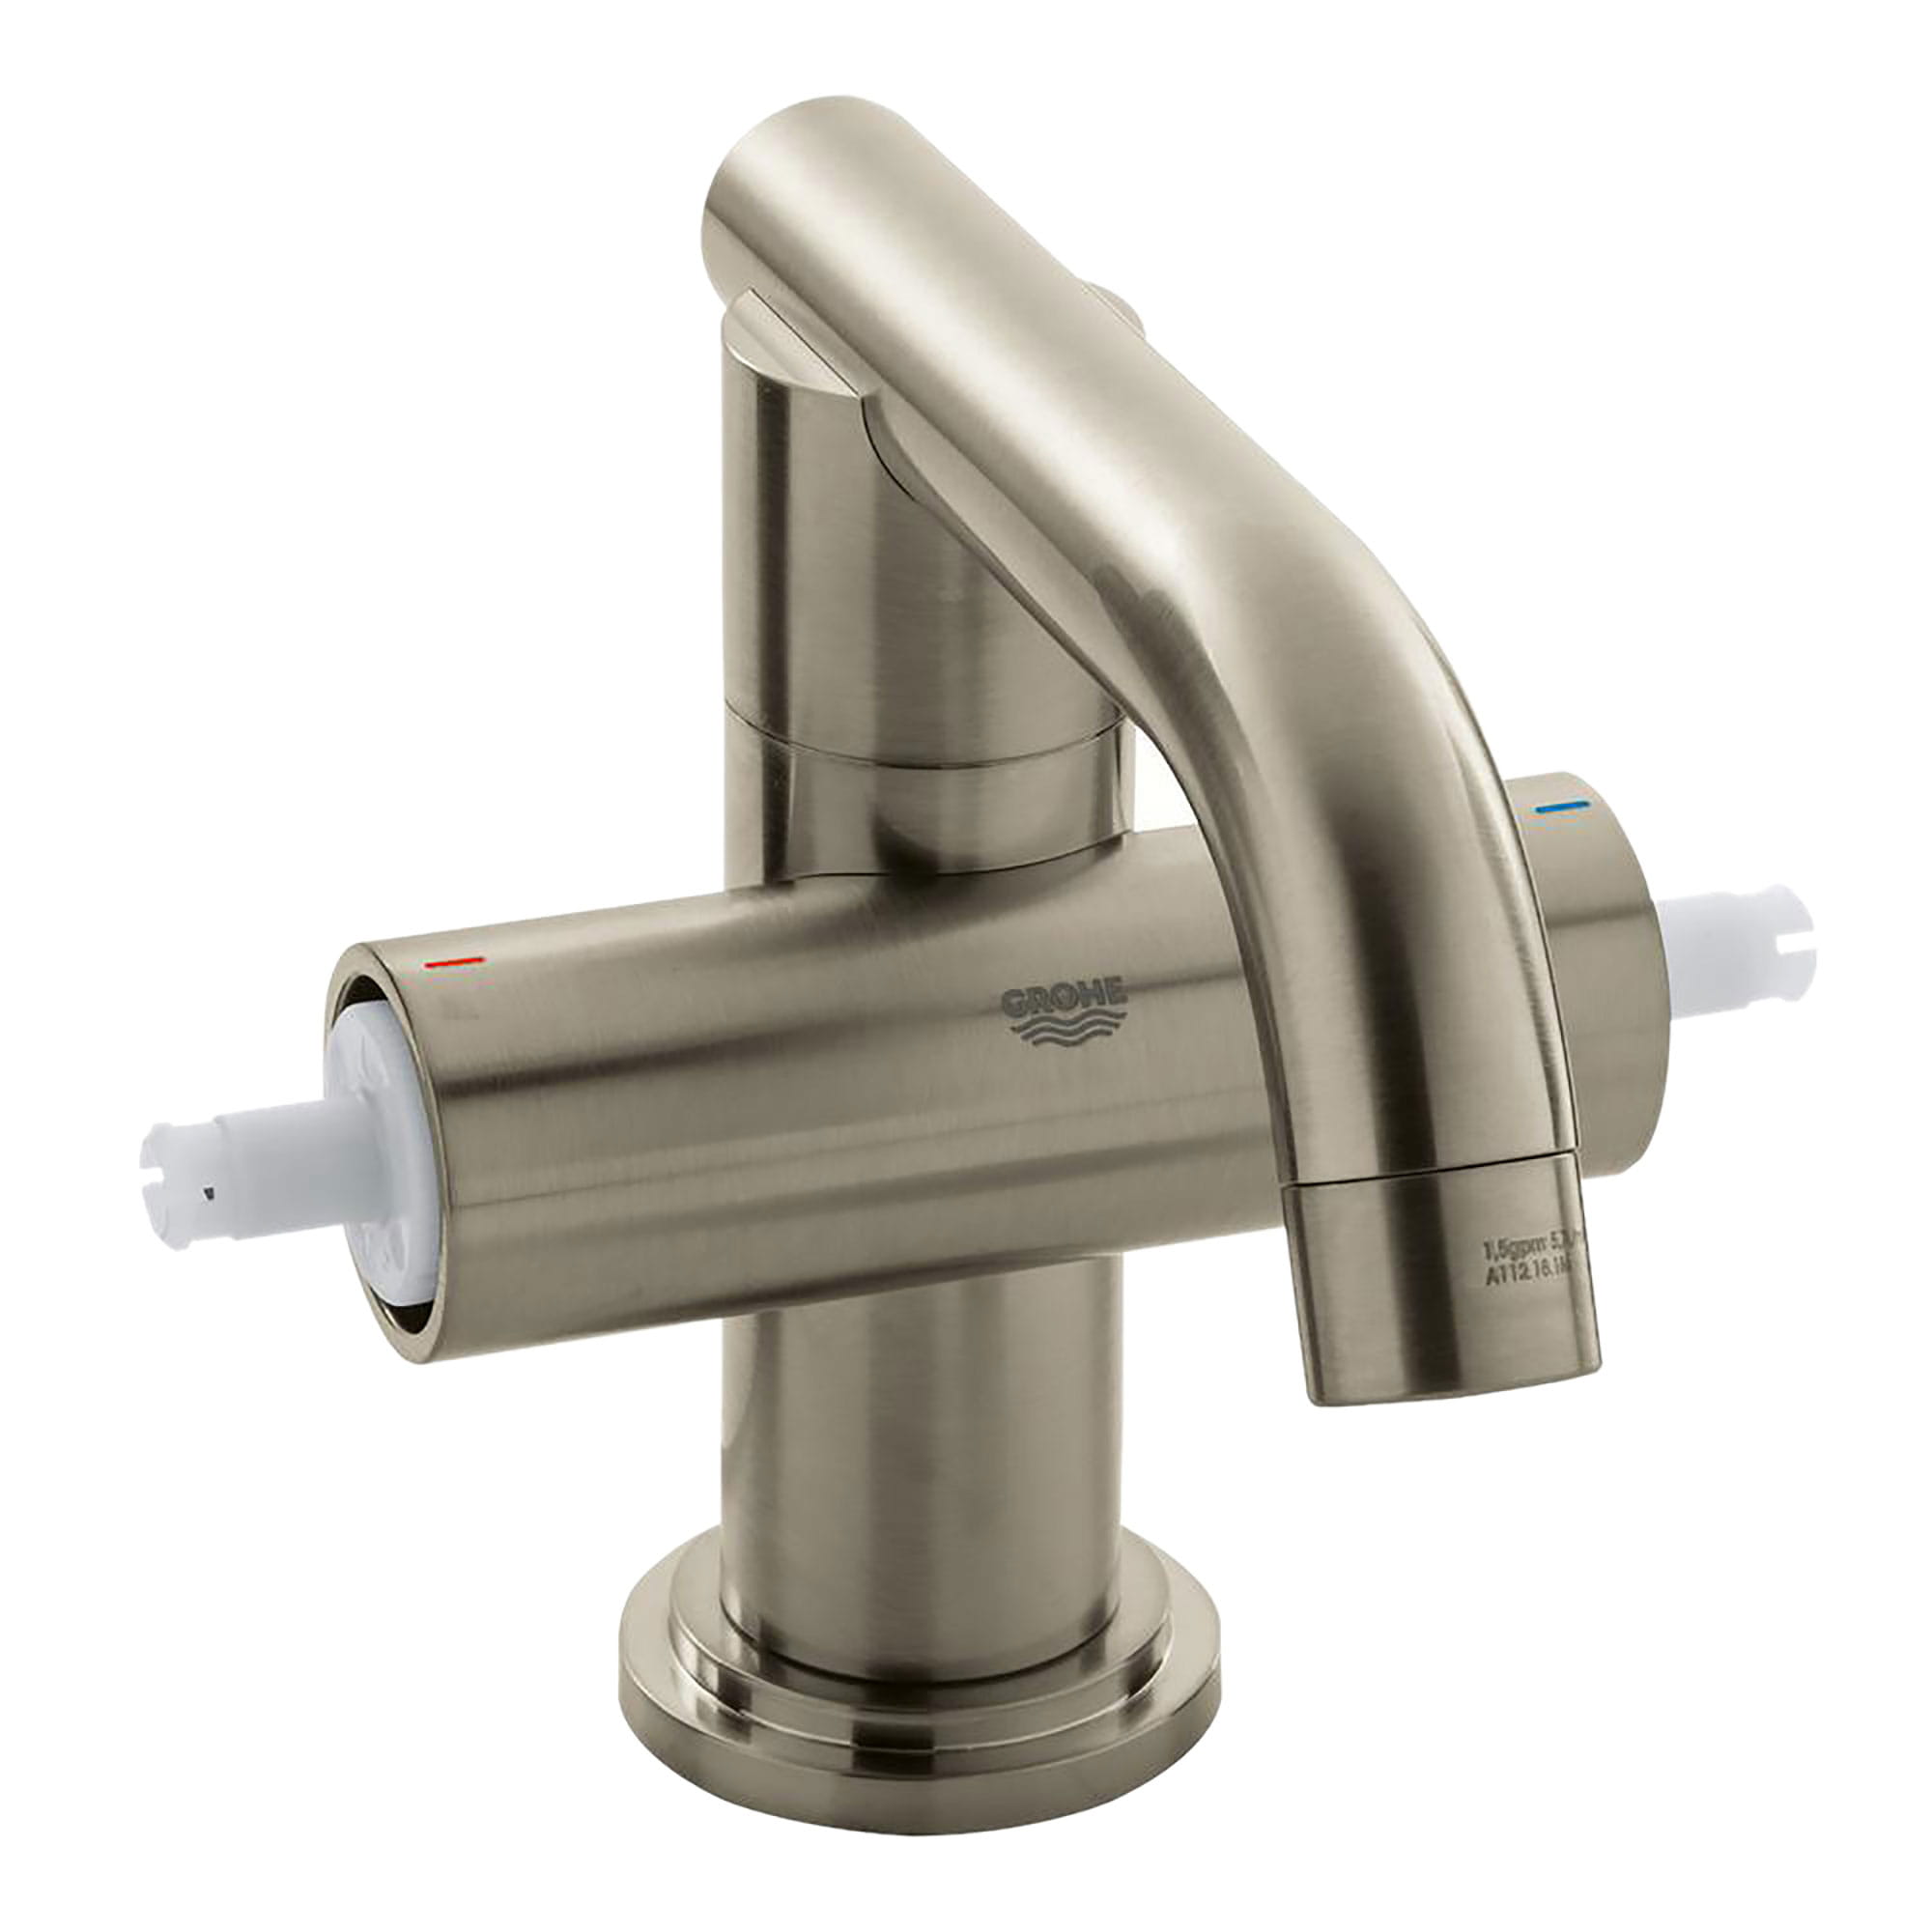 Single Hole 2 Handle M Size Bathroom Faucet 12 GPM GROHE BRUSHED NICKEL